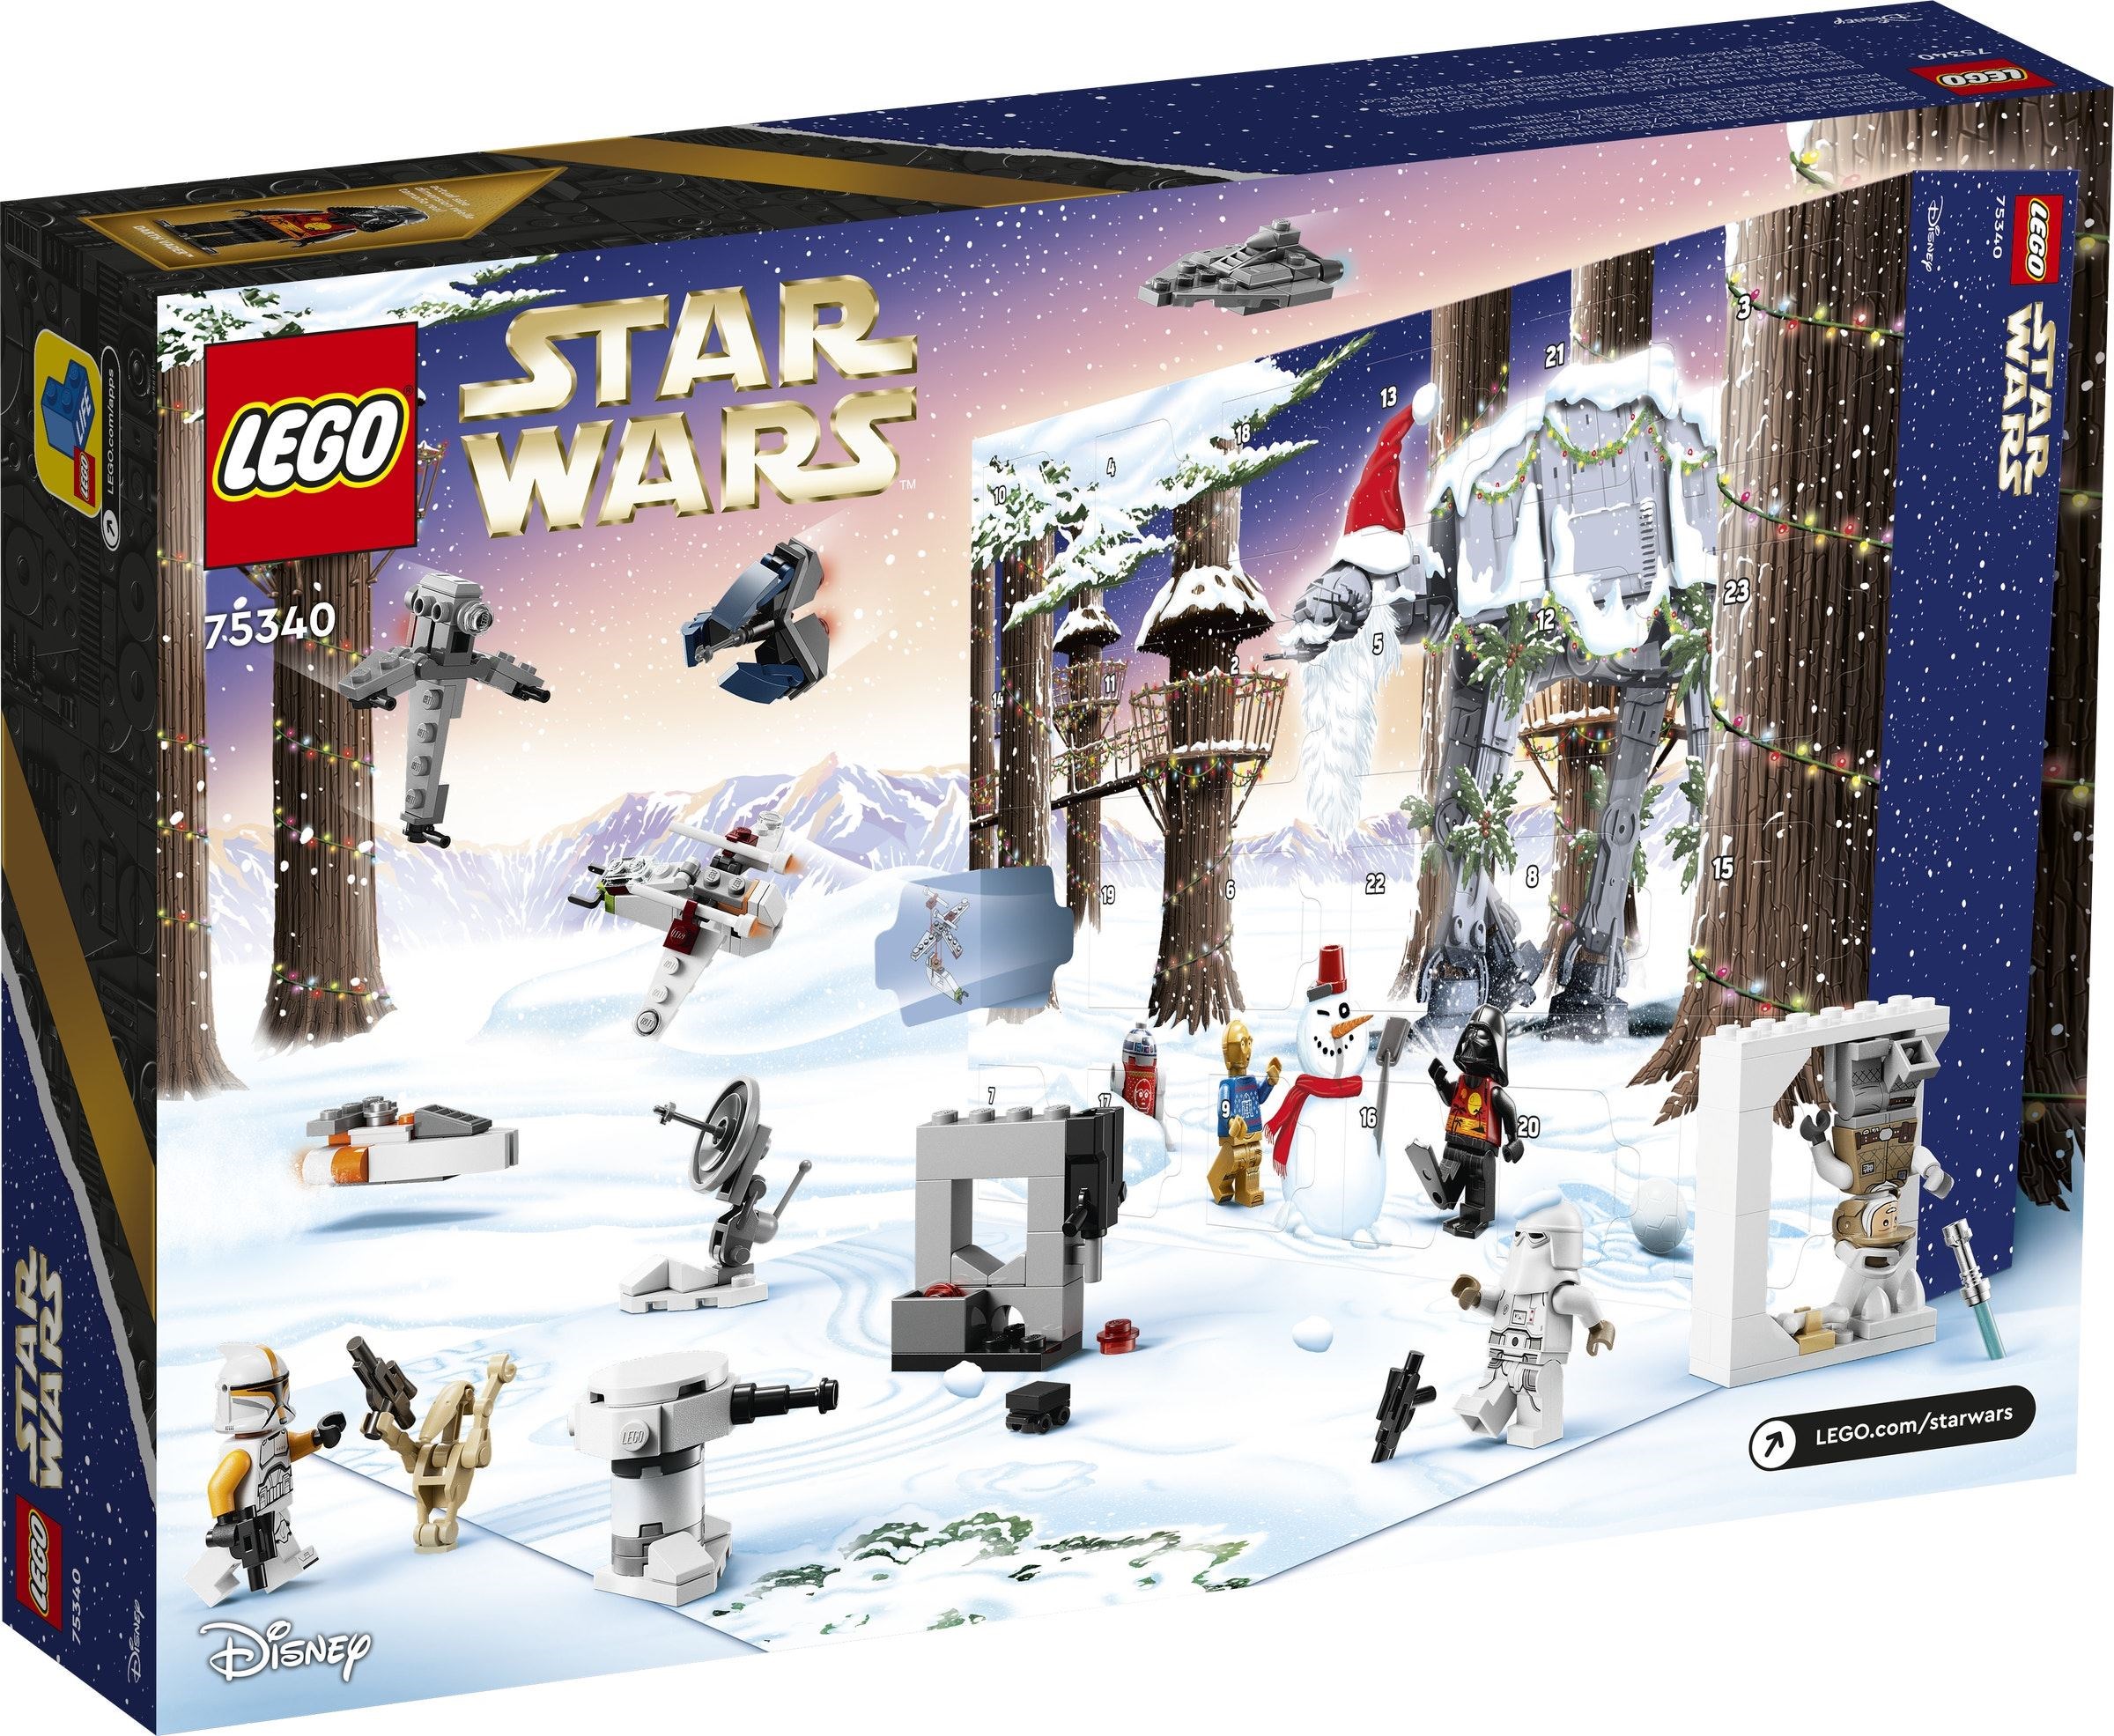 Star Wars and Harry Potter Advent Calendars officially revealed